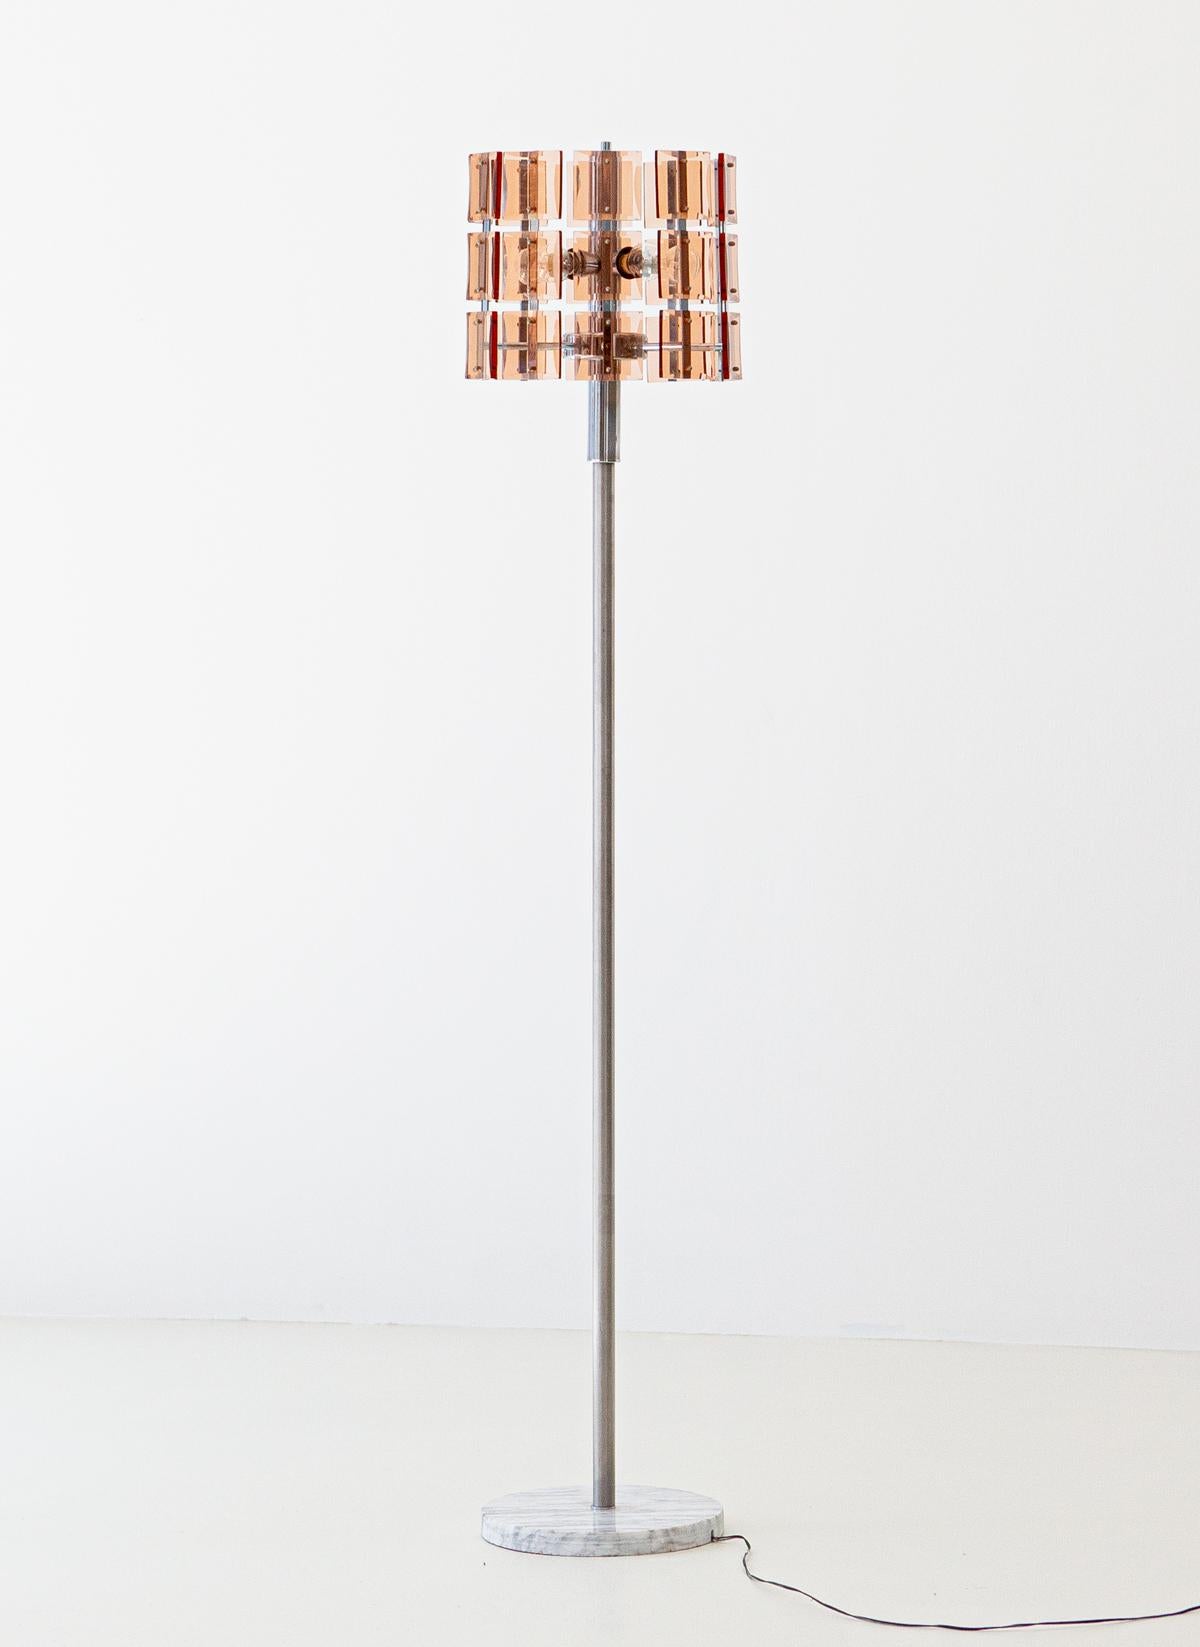 Italian Cognac Glass with Marble Floor Lamp, 1970s For Sale 4